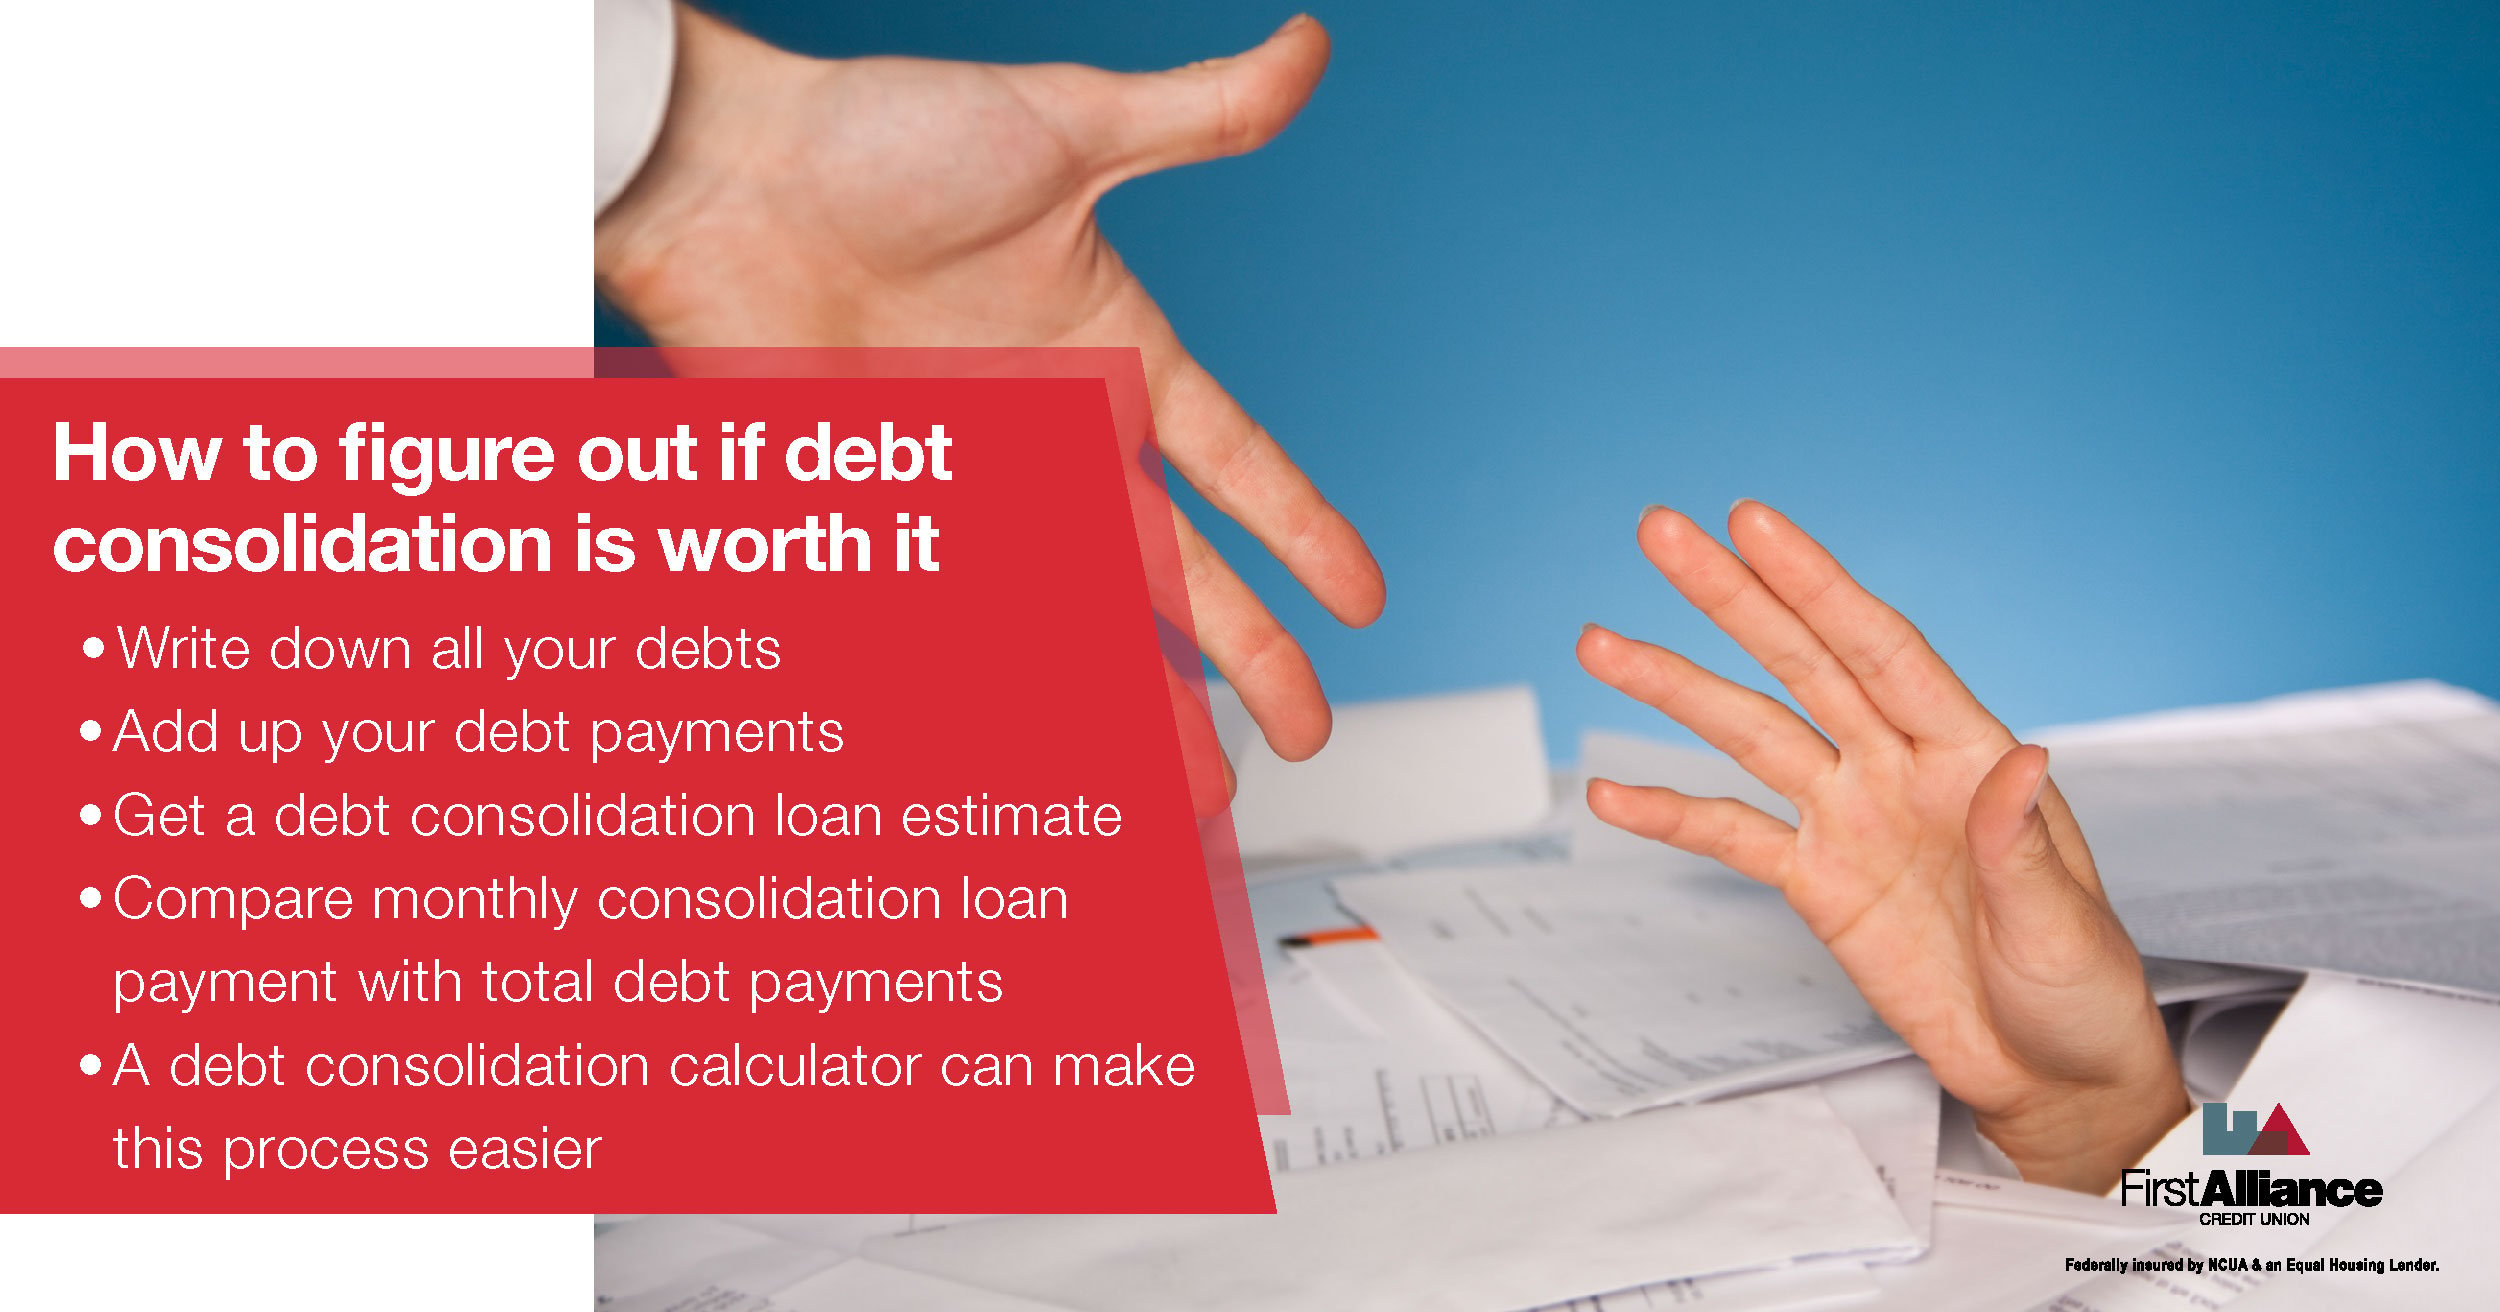 Is debt consolidation worth it